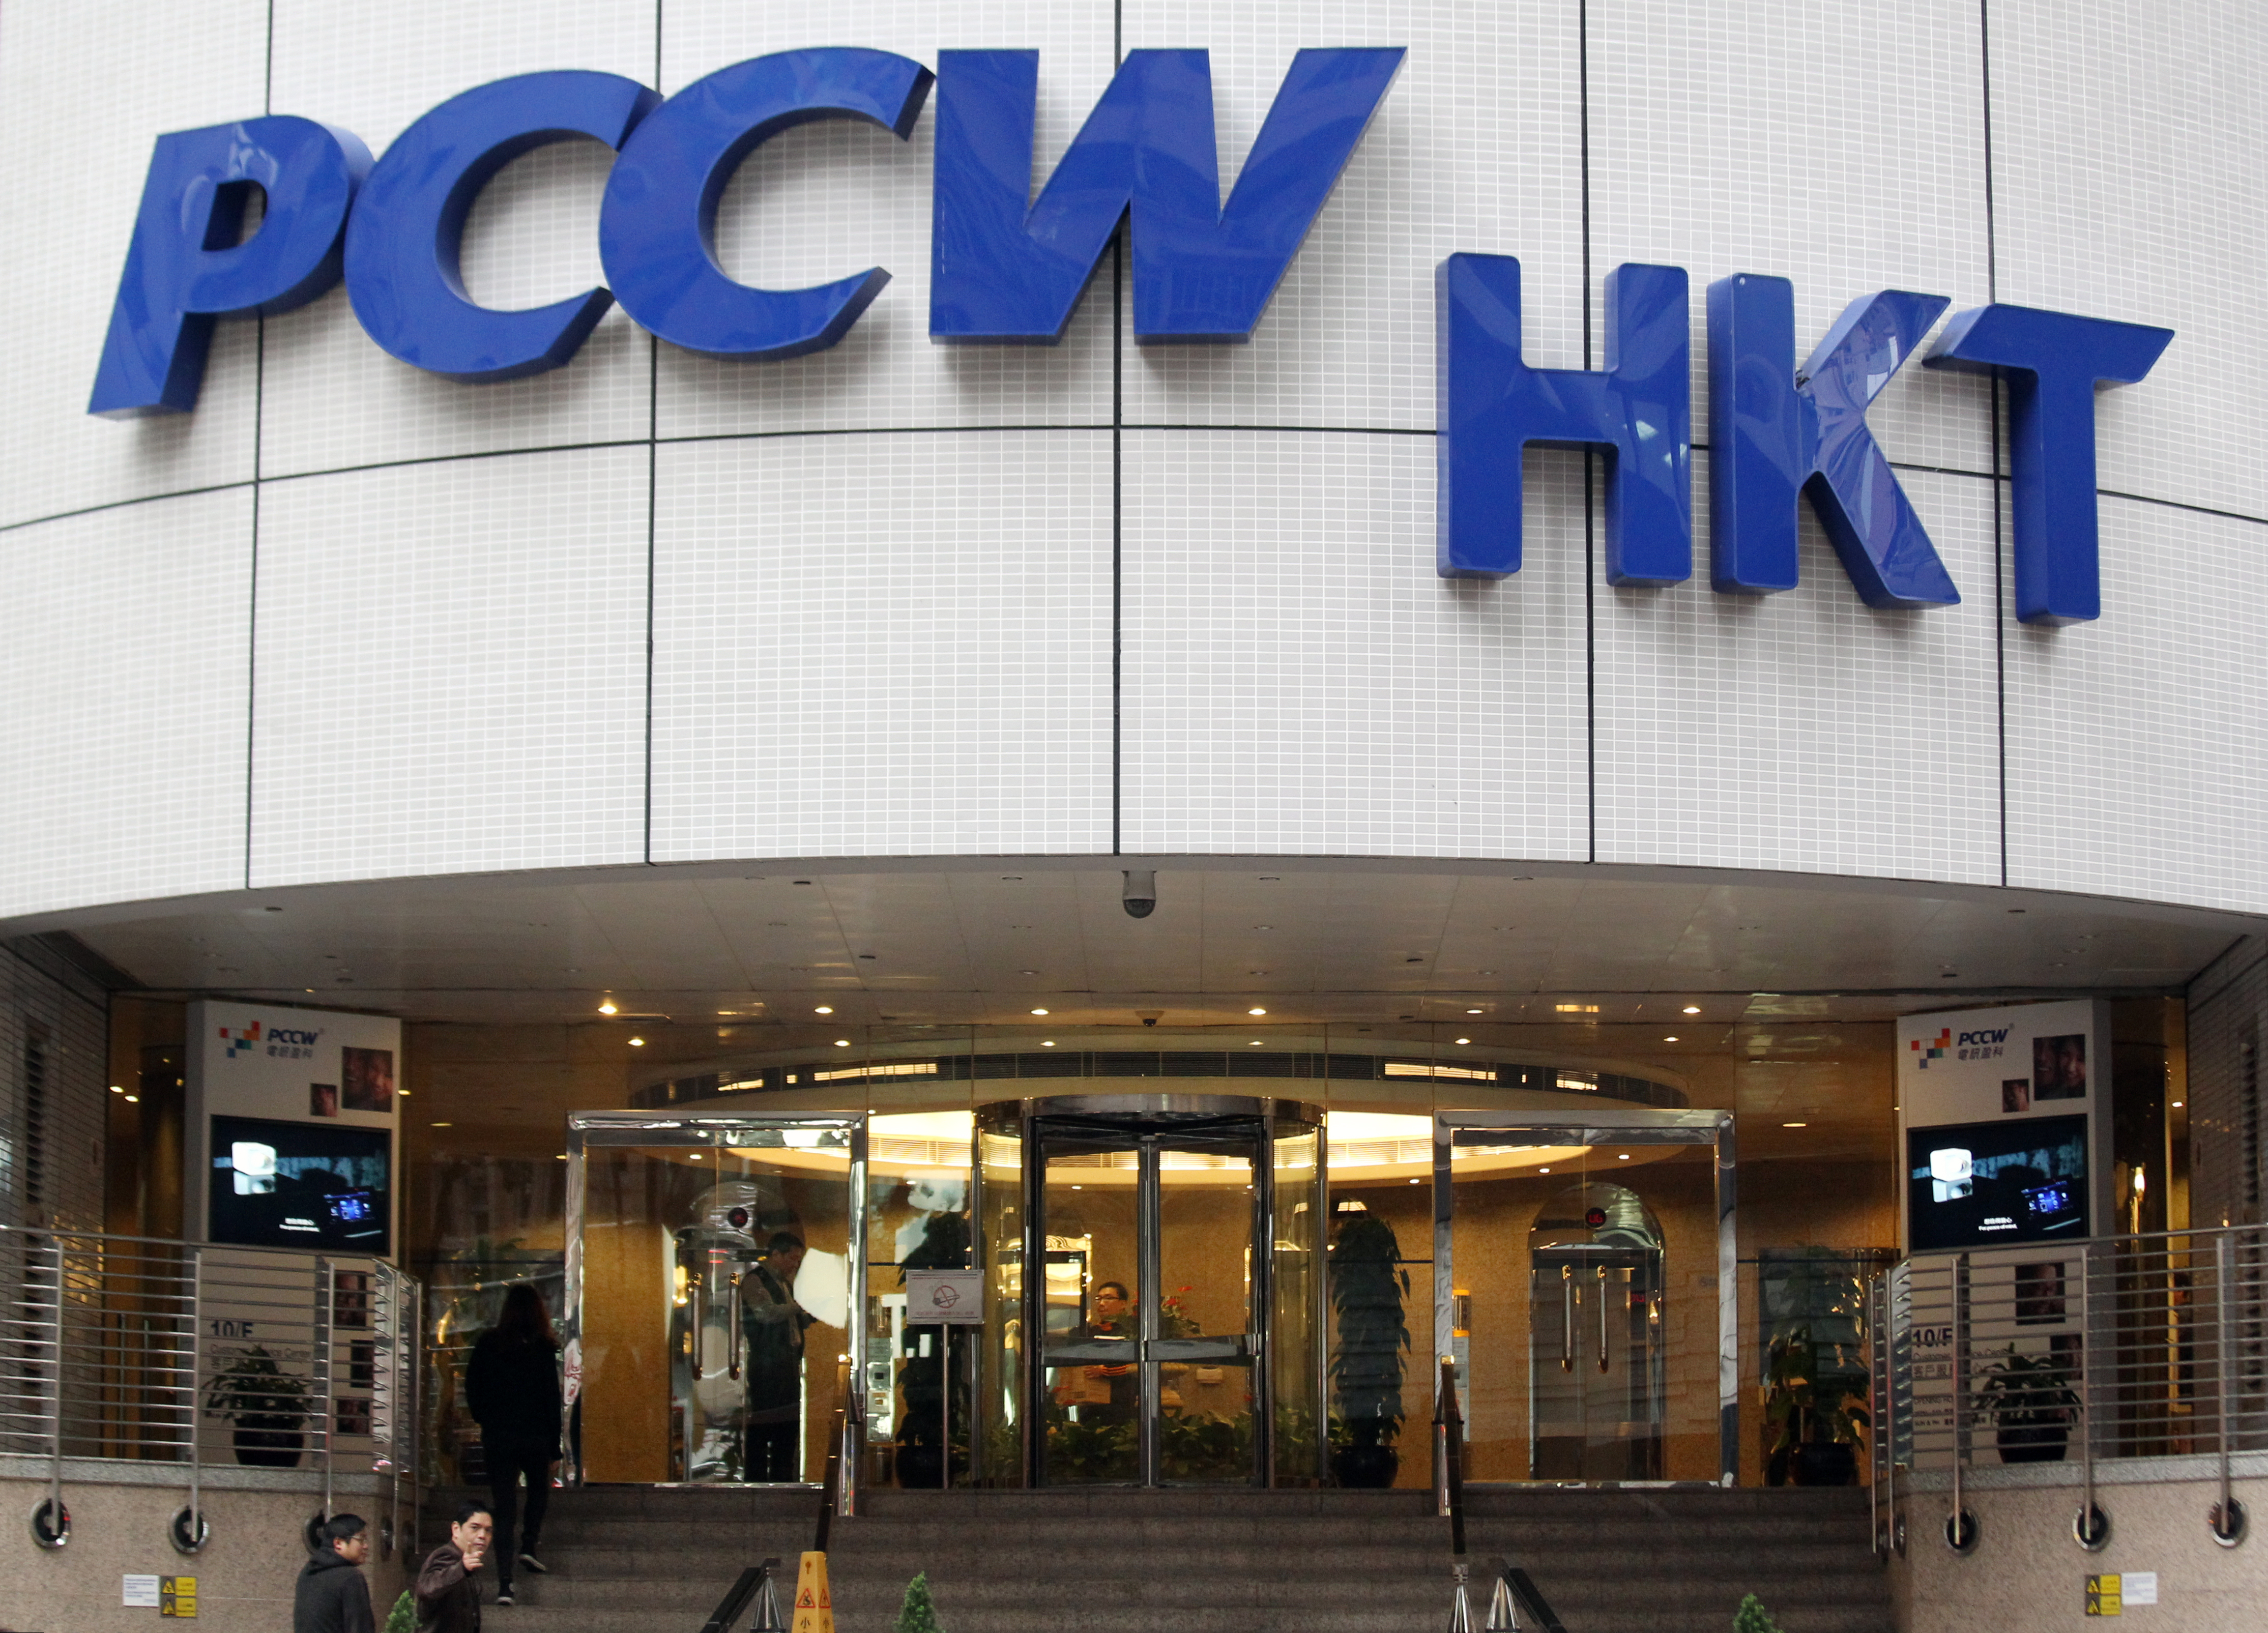 PCCW saw a 22 per cent jump in HKT's net profit to HK$3 billion last year. Photo: Dickson Lee